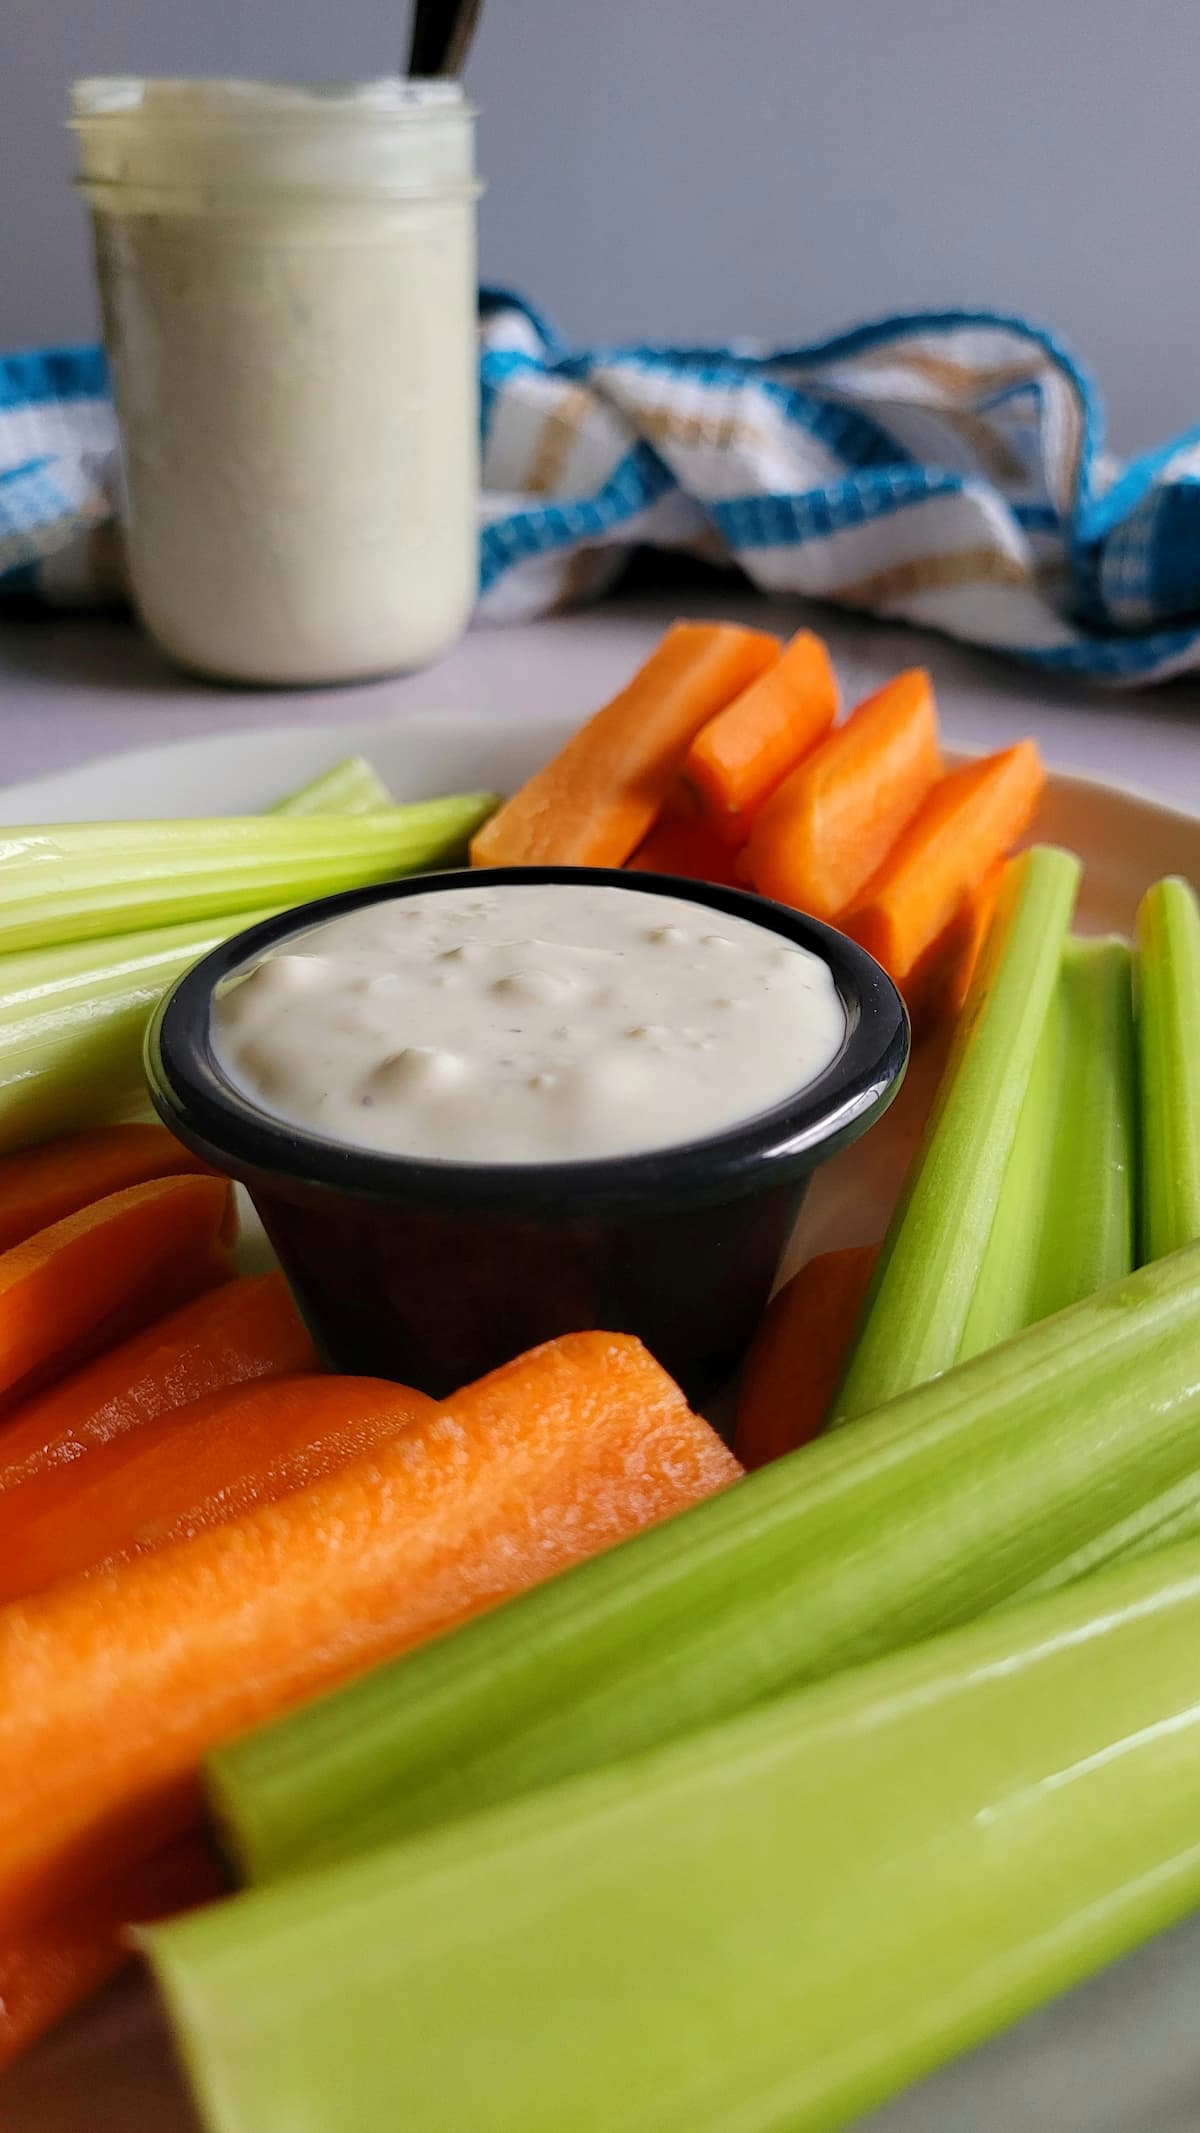 carrot and celery sticks on a plate with a ramekin of blue cheese dressing, a jar of more dressing in the background